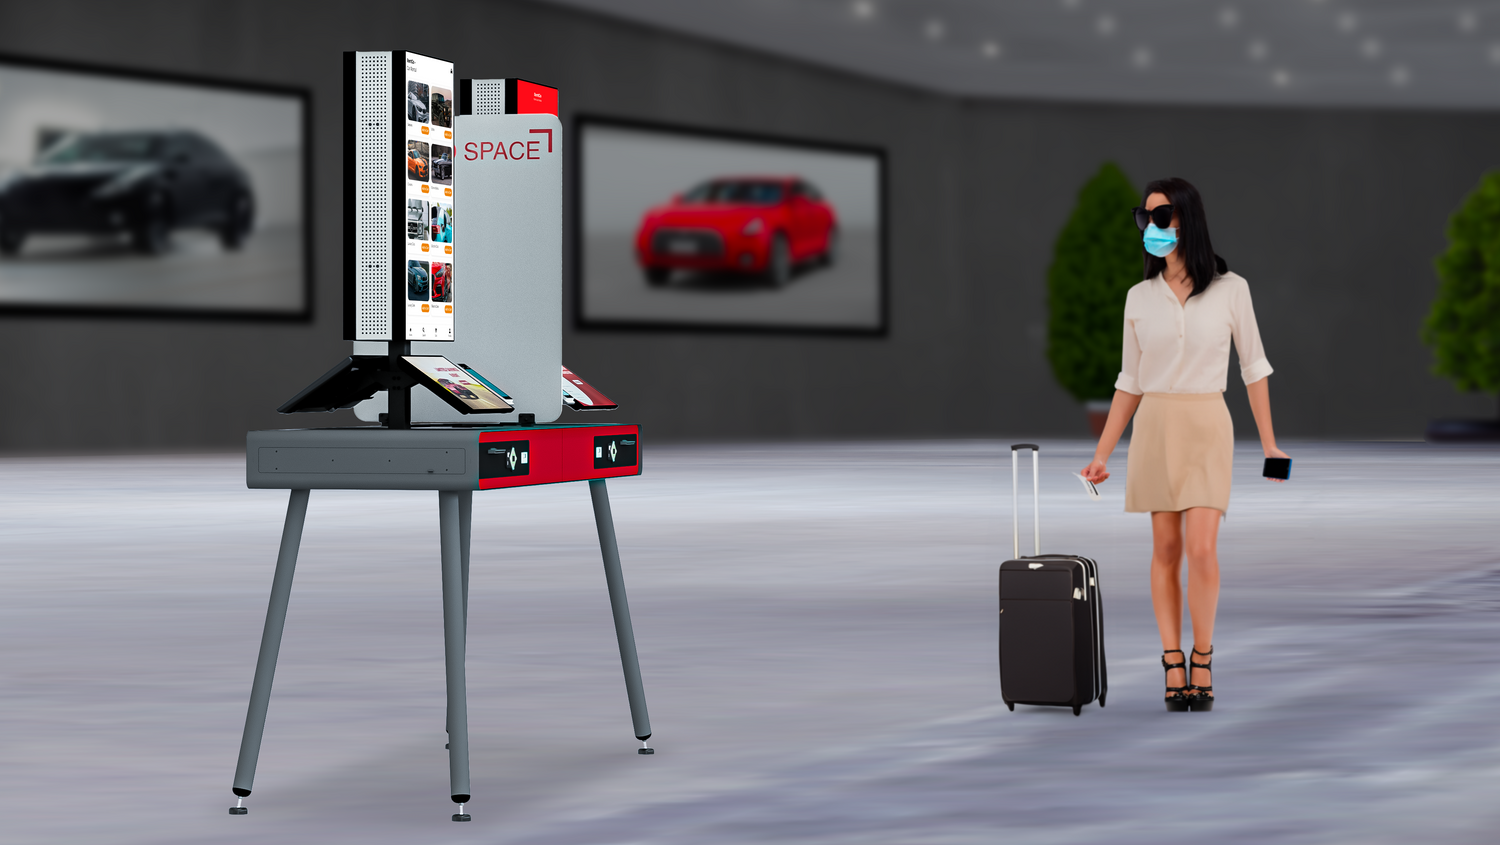 The Next Level Car Rentals Kiosk: Unmatched Efficiency